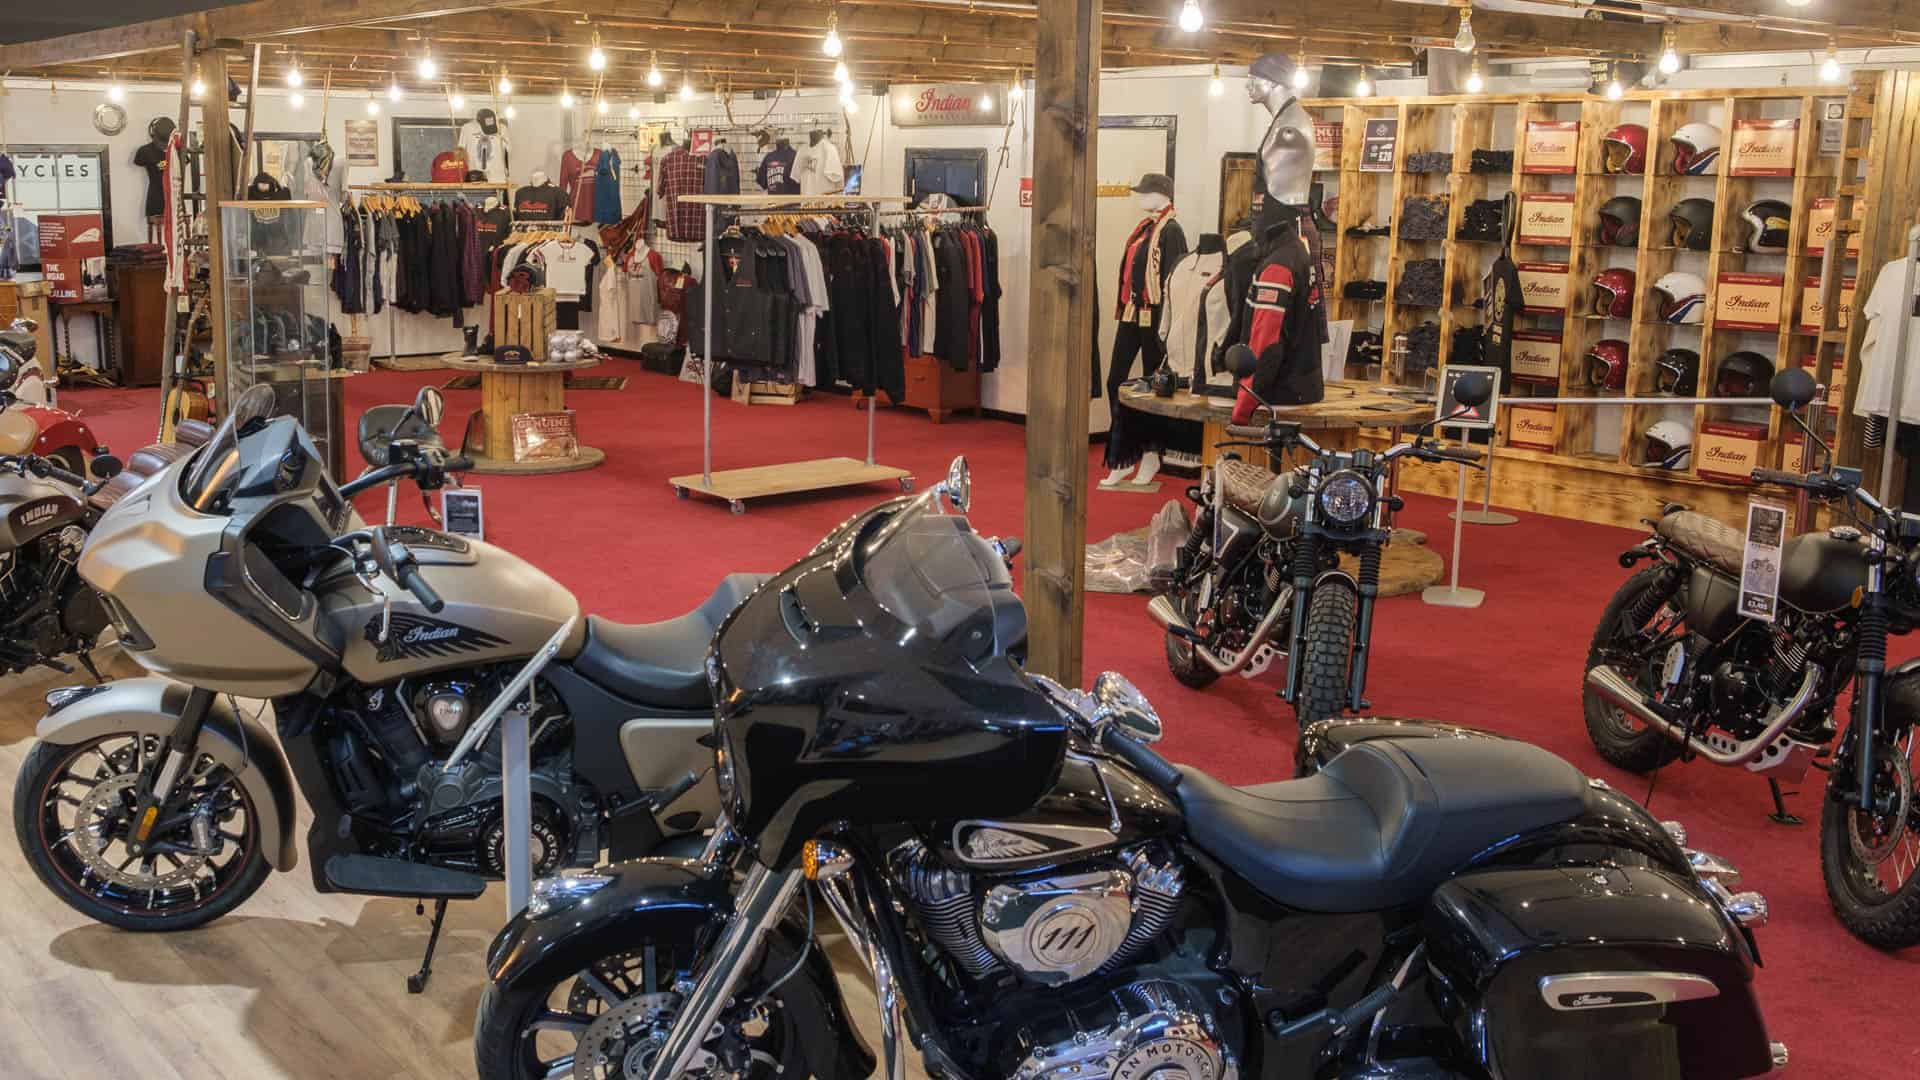 shop full of motorcycle clothing and motorcycles on display